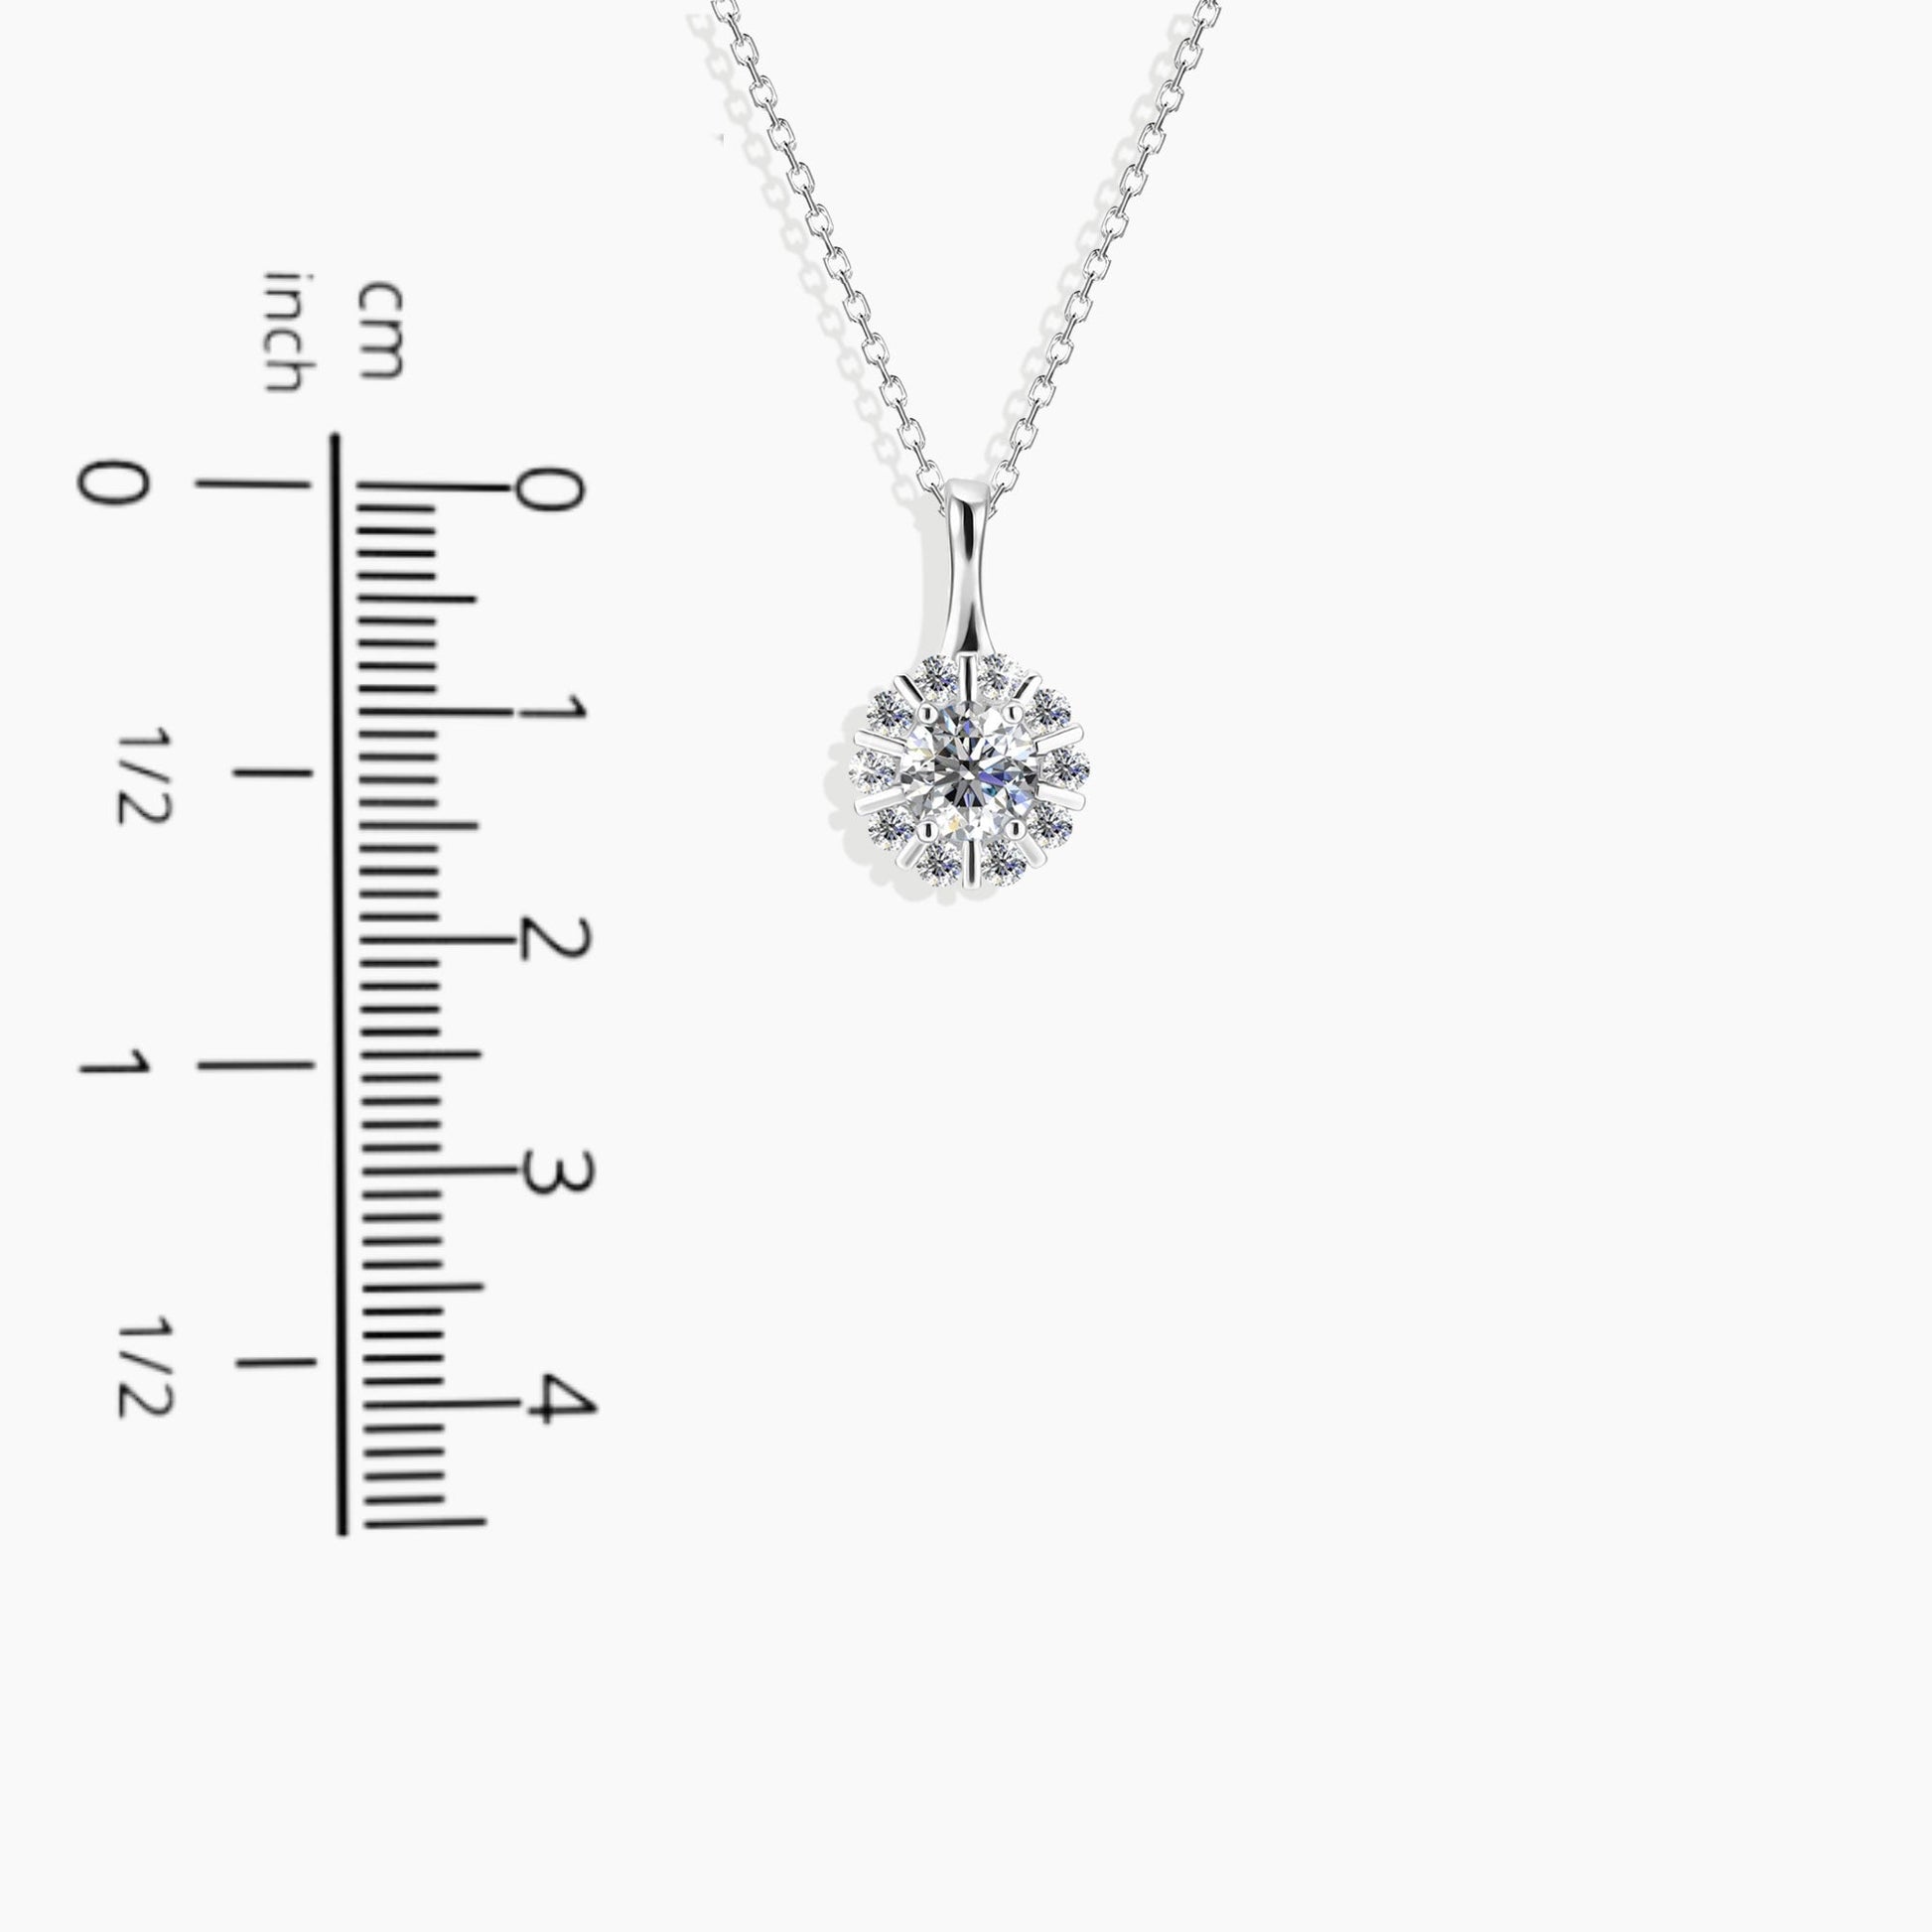 Moissanite Sparkle Pendant Necklace displayed next to a scale, providing an accurate representation of its size and dimensions.